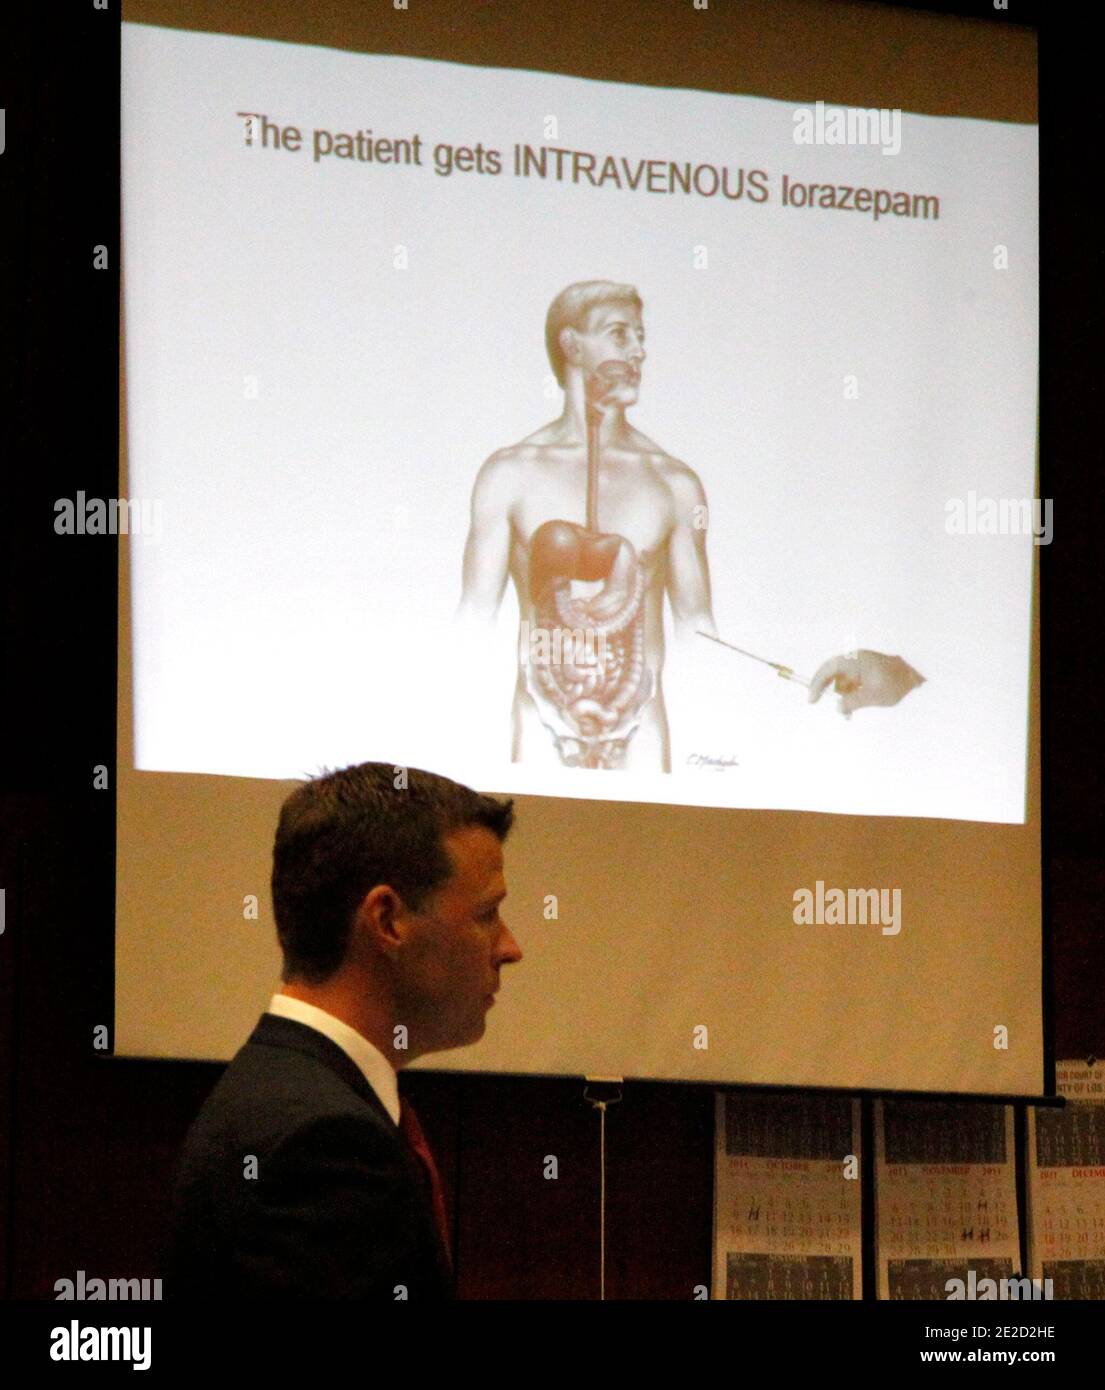 A slide showing the human digestive tract is seen as deputy district attorney David Walgren examines anesthesiology expert Dr. Steven Shafer, not pictured, during Dr. Conrad Murray's involuntary manslaughter trial in Los Angeles on October 20, 2011. Murray has pleaded not guilty and faces four years in prison and the loss of his medical license if convicted of involuntary manslaughter in Michael Jackson's death. Photo by Reed Saxon/Pool/ABACAPRESS.COM Stock Photo